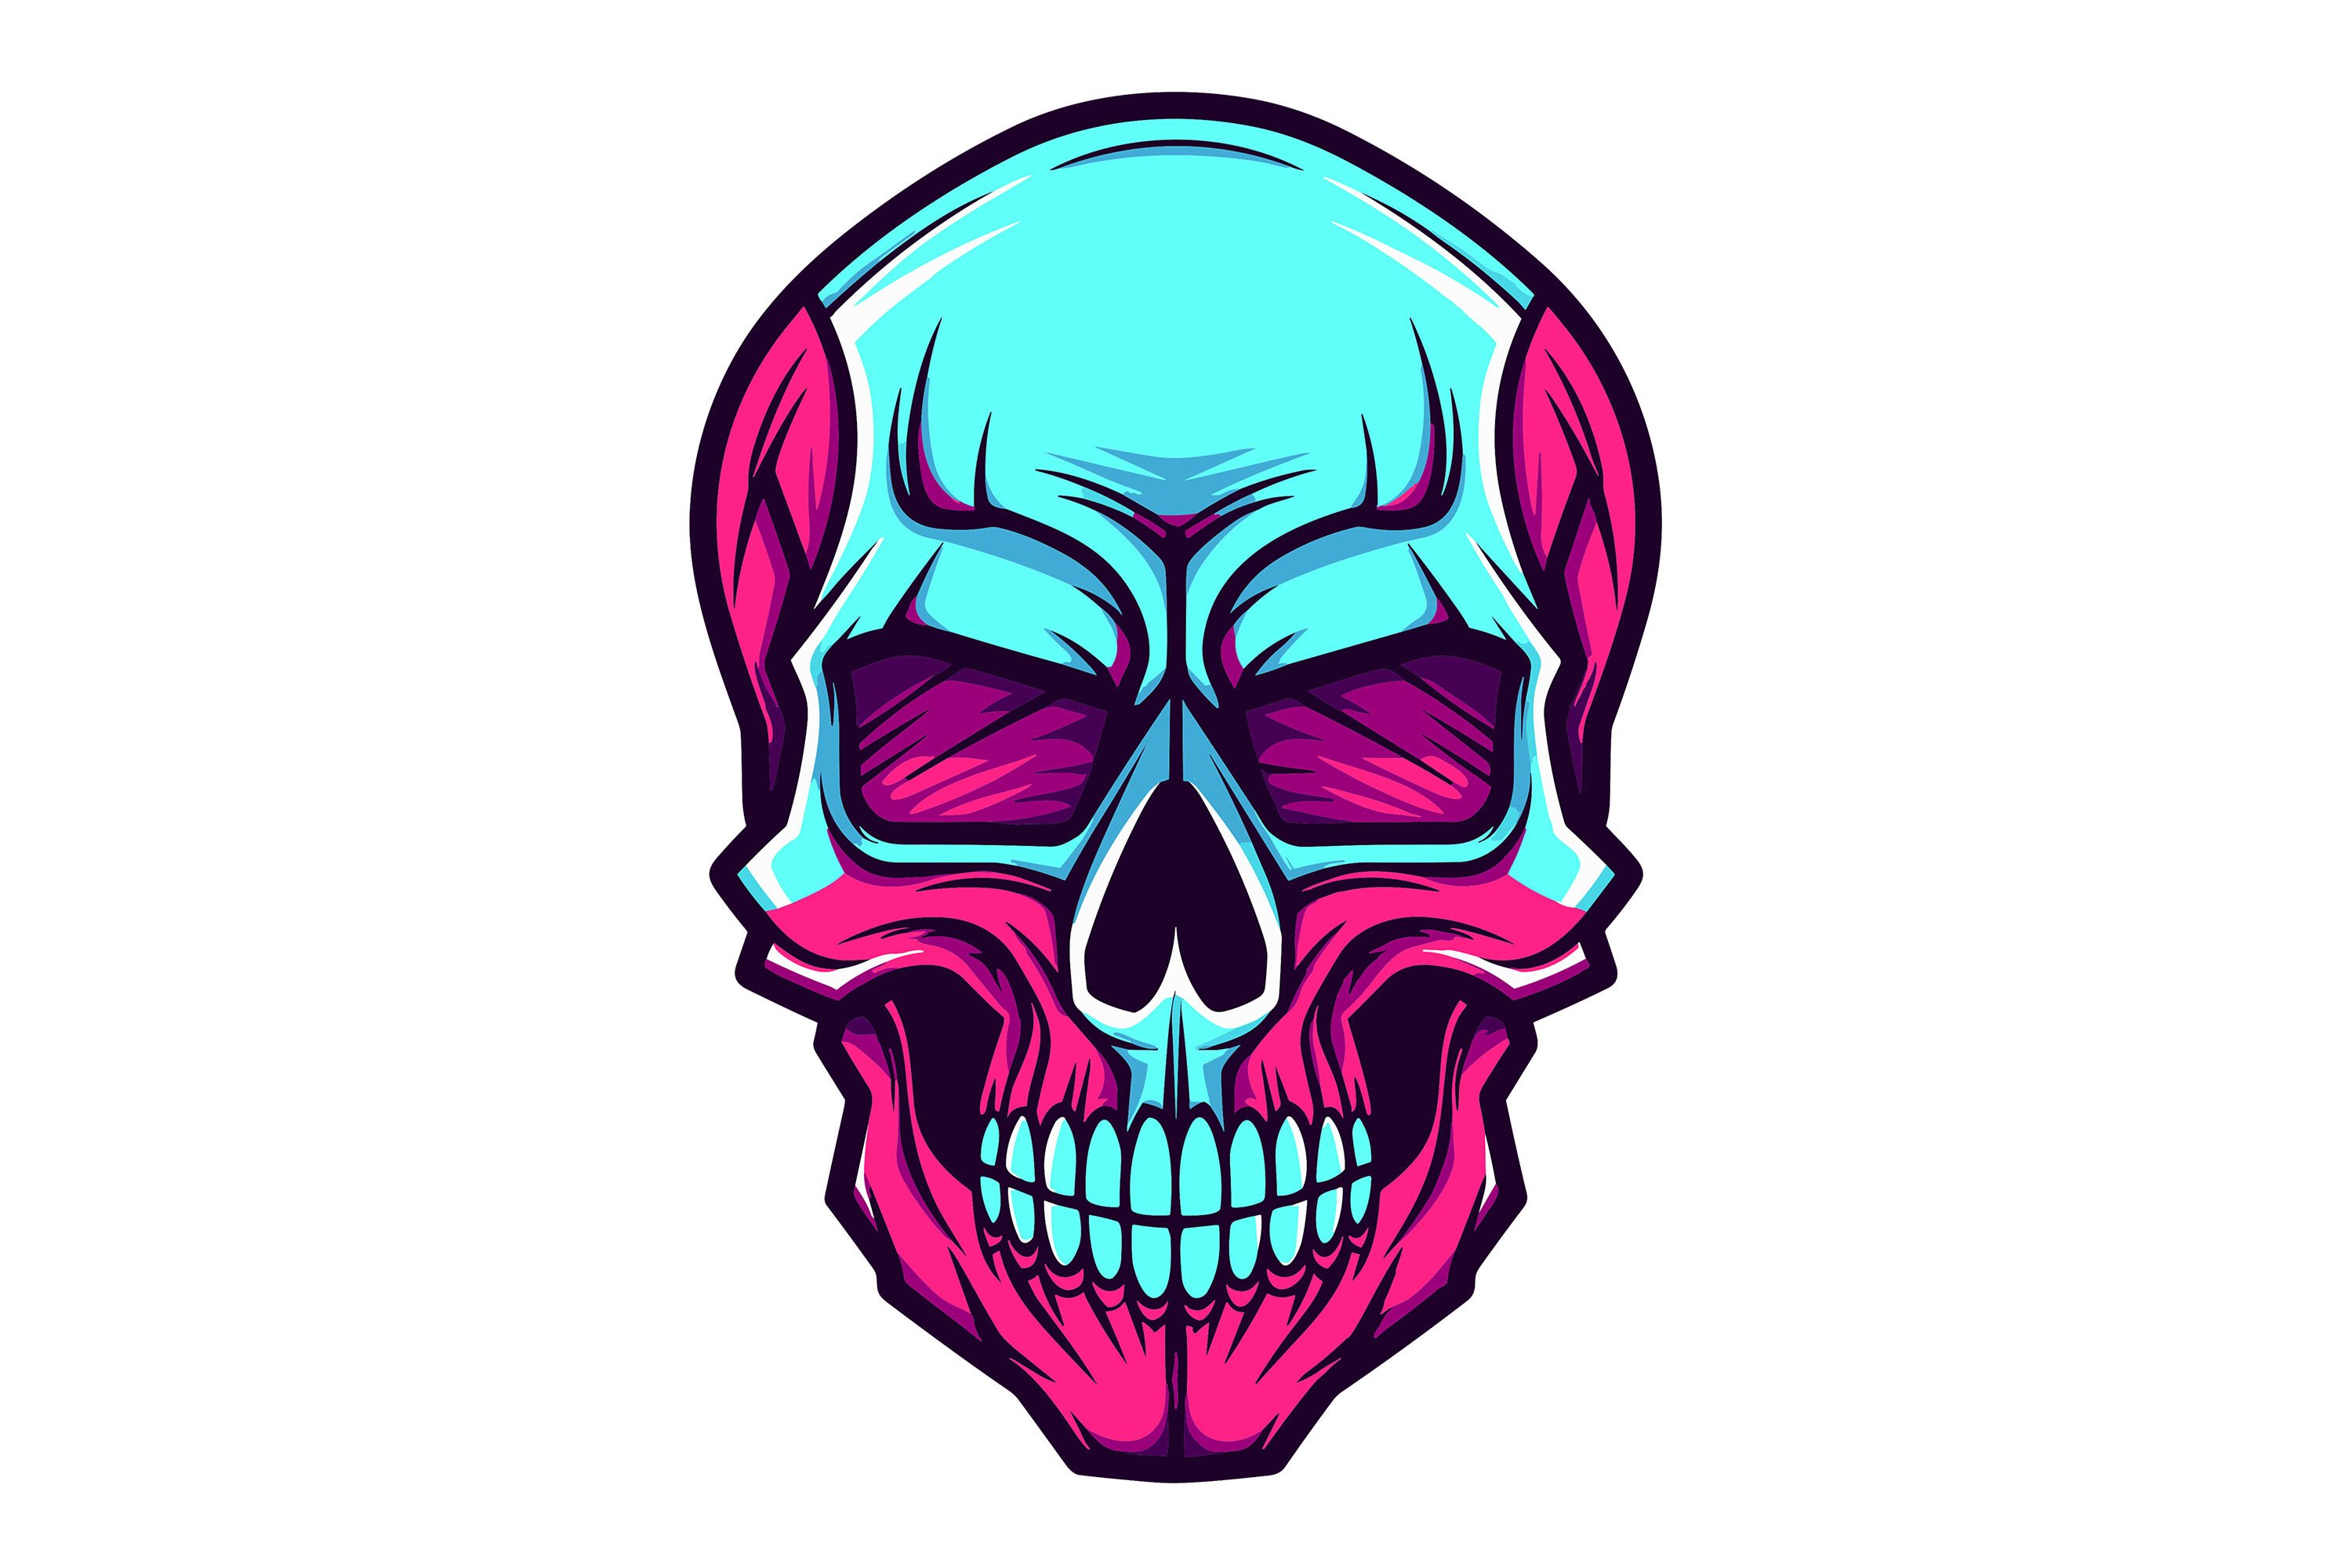 Colored Skull Clipart Graphic by Illustrately · Creative Fabrica